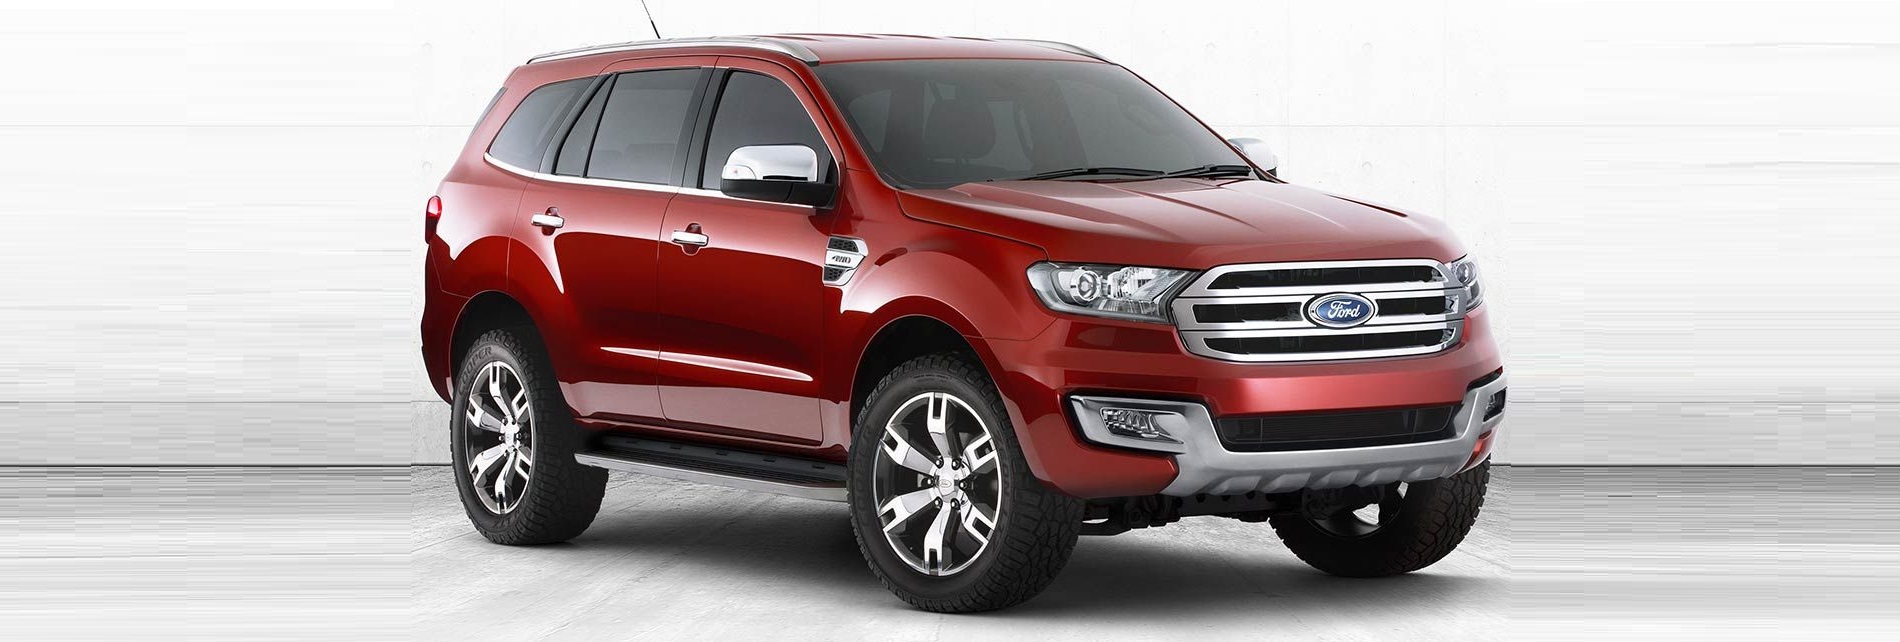 Ford Endeavour 2015 foto - 4